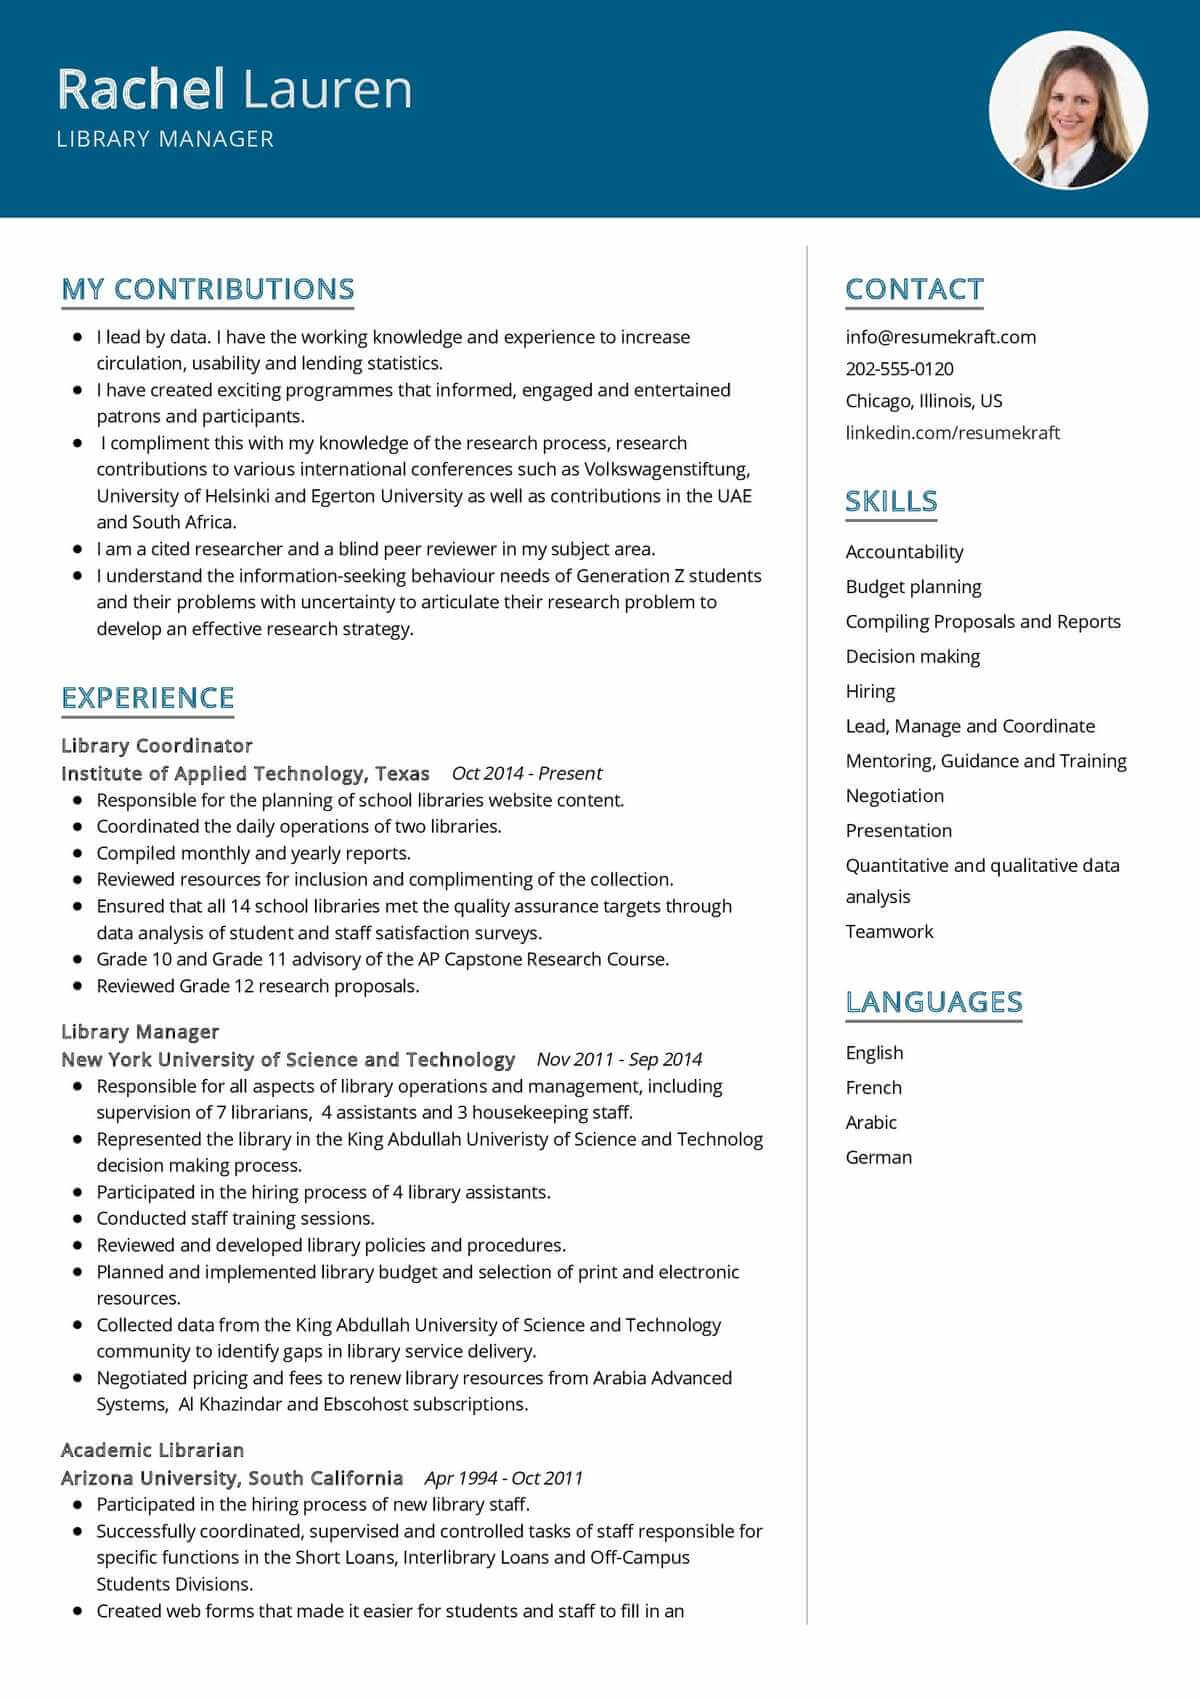 Library-Manager-Resume_00001